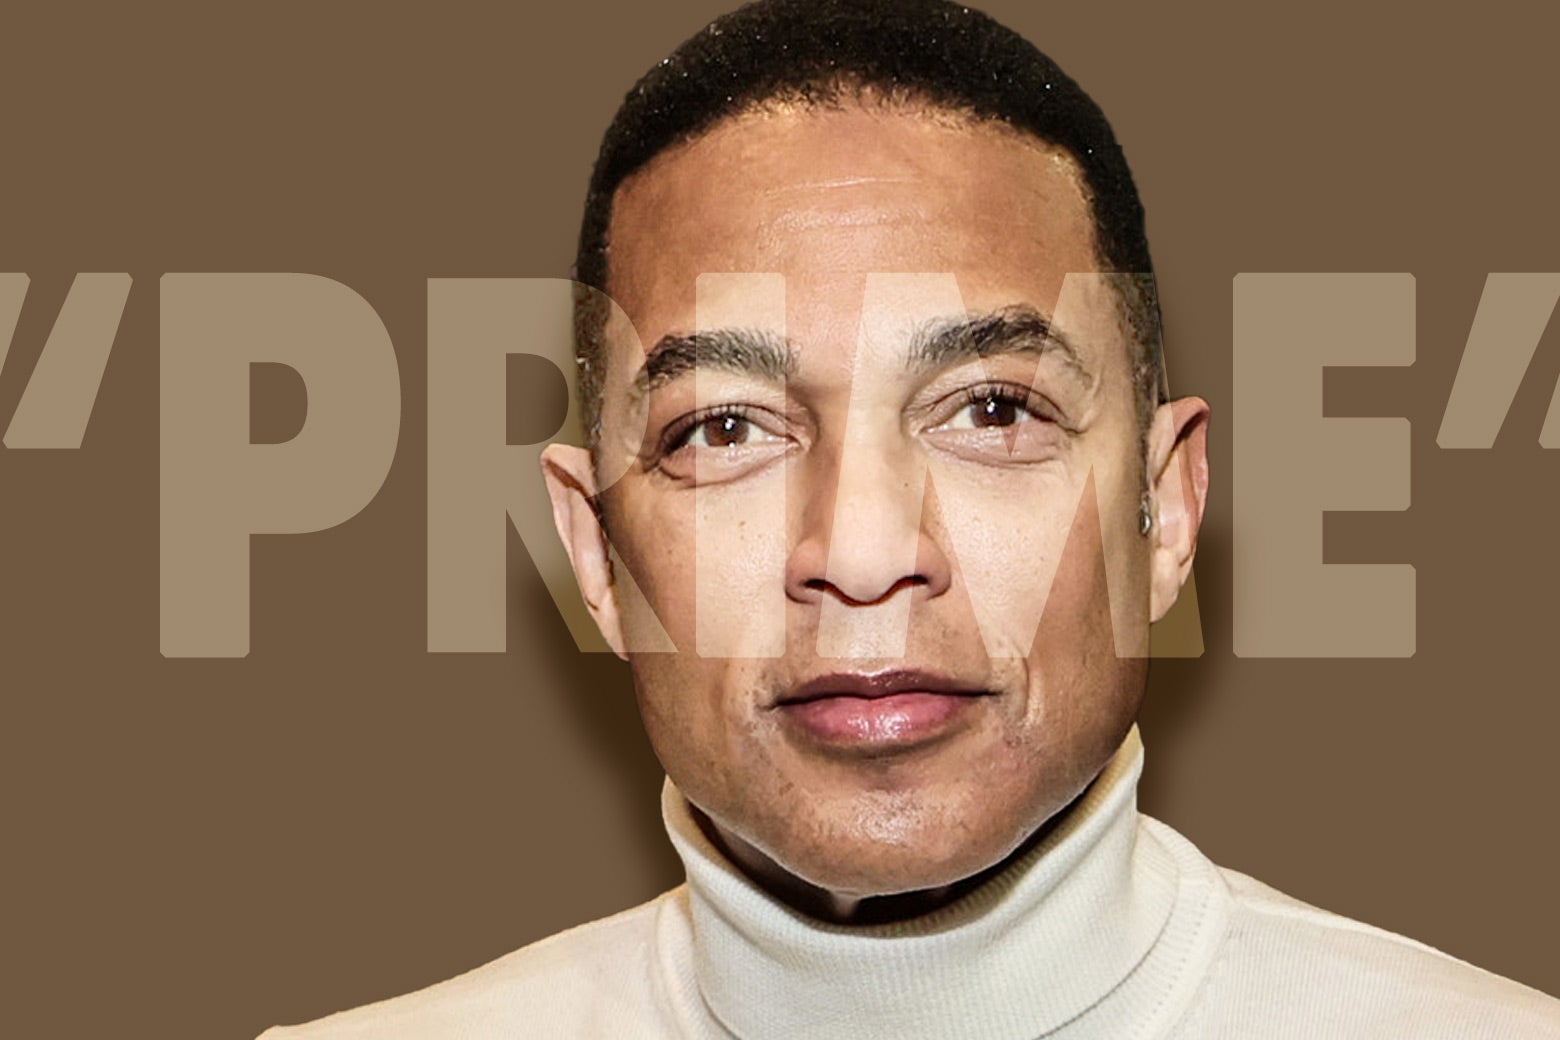 Don Lemon Is So, So Confused About a Woman’s “Prime.” Let Me Help.